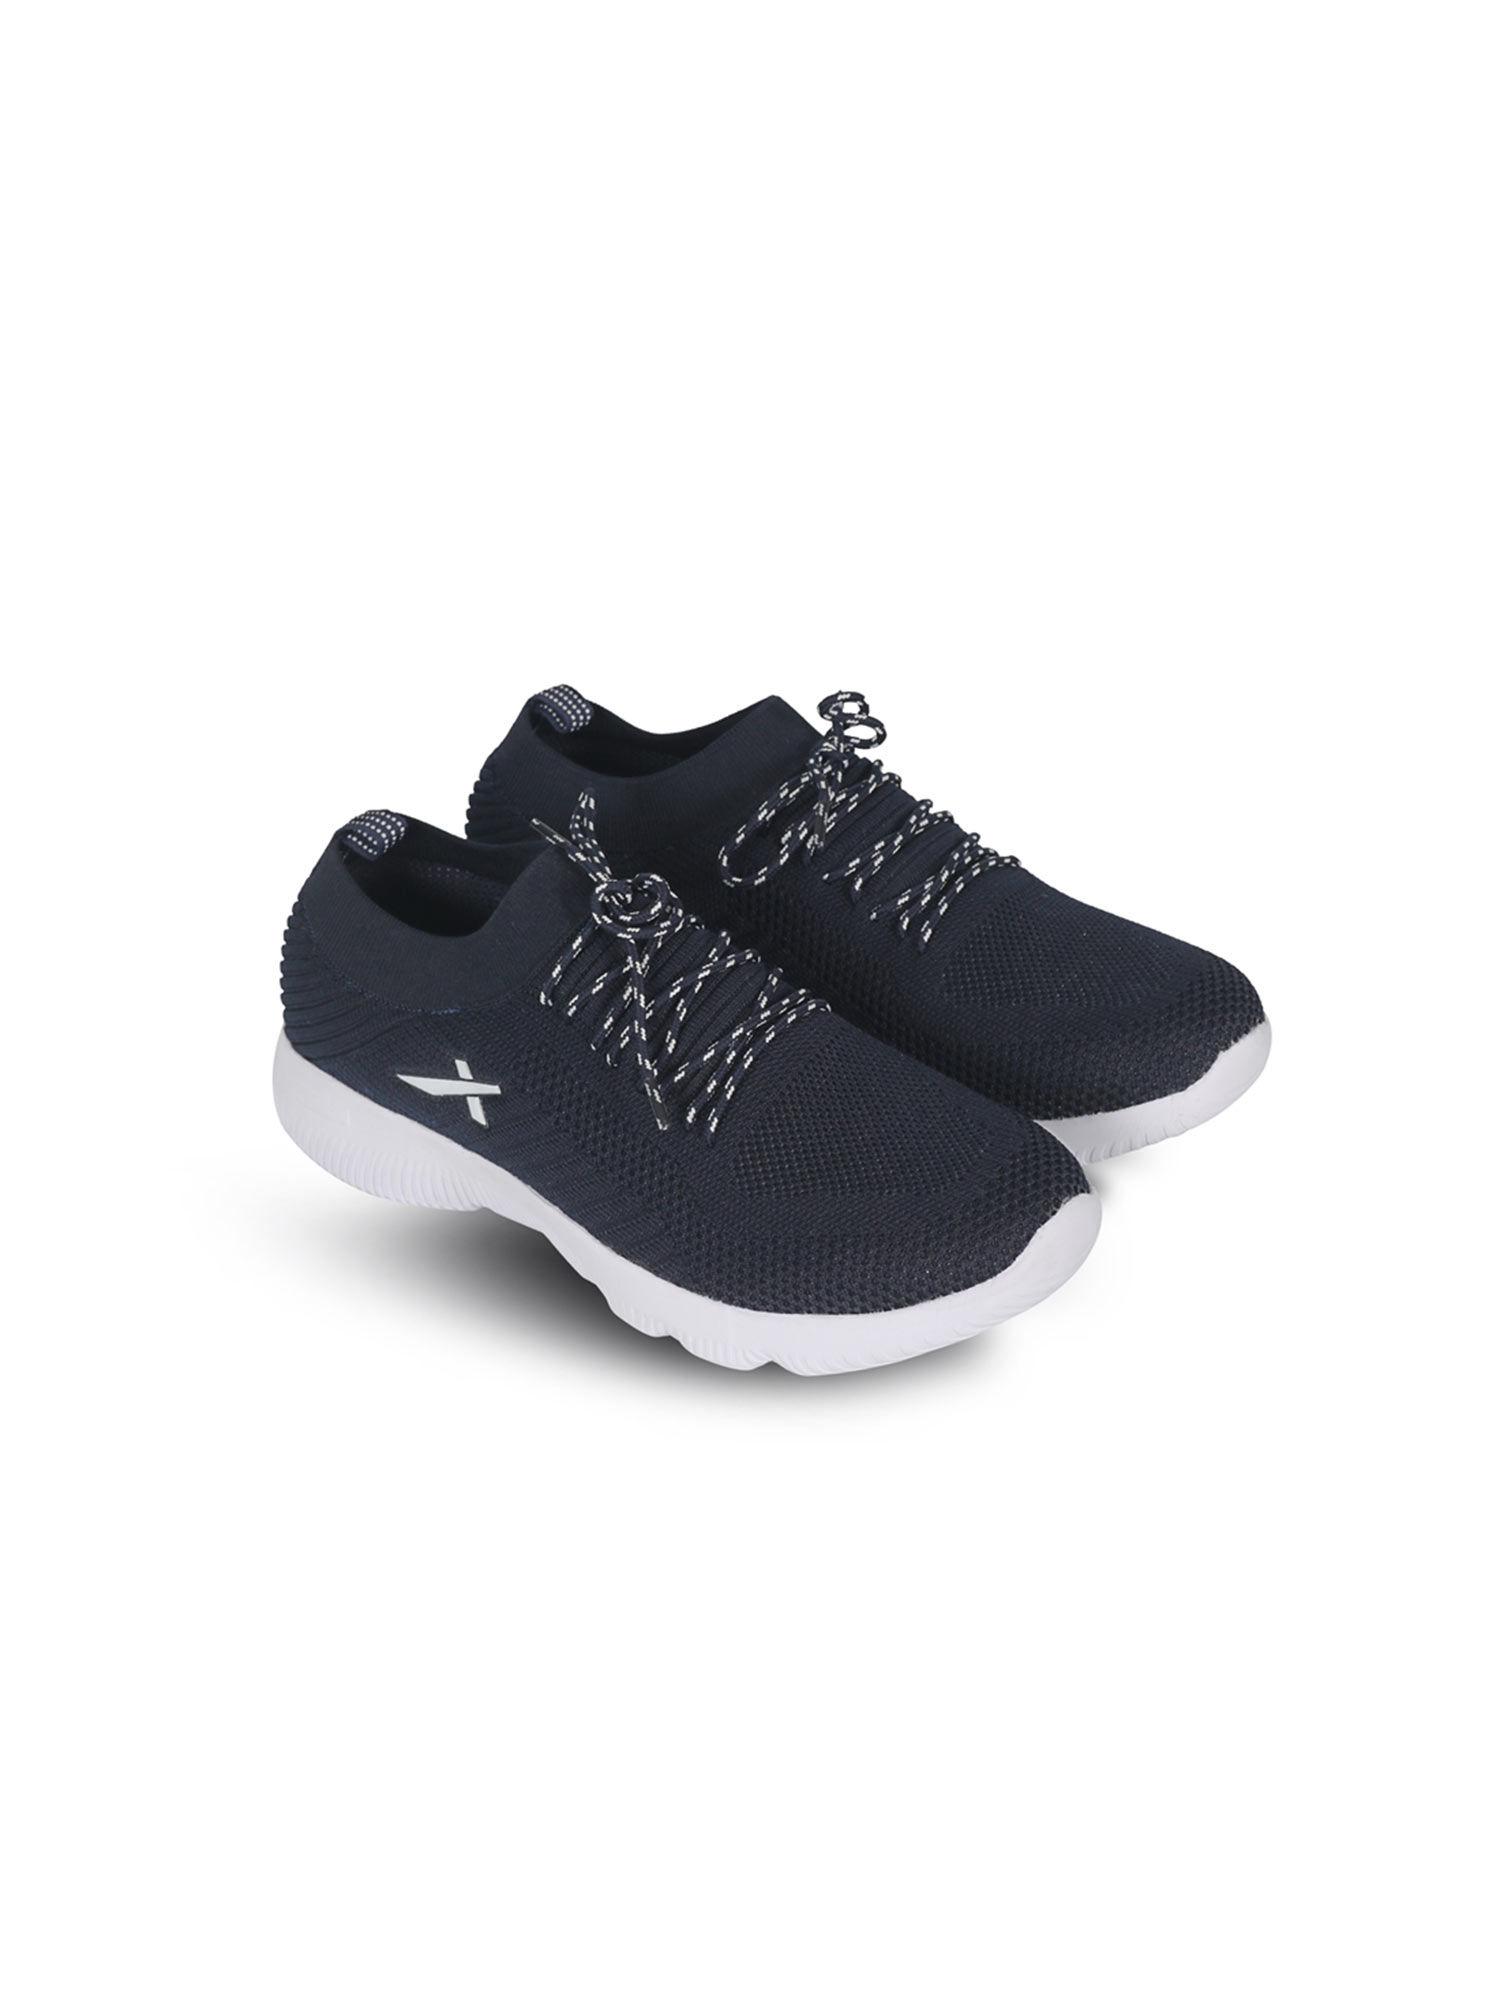 rs-7200-running-shoes-for-men